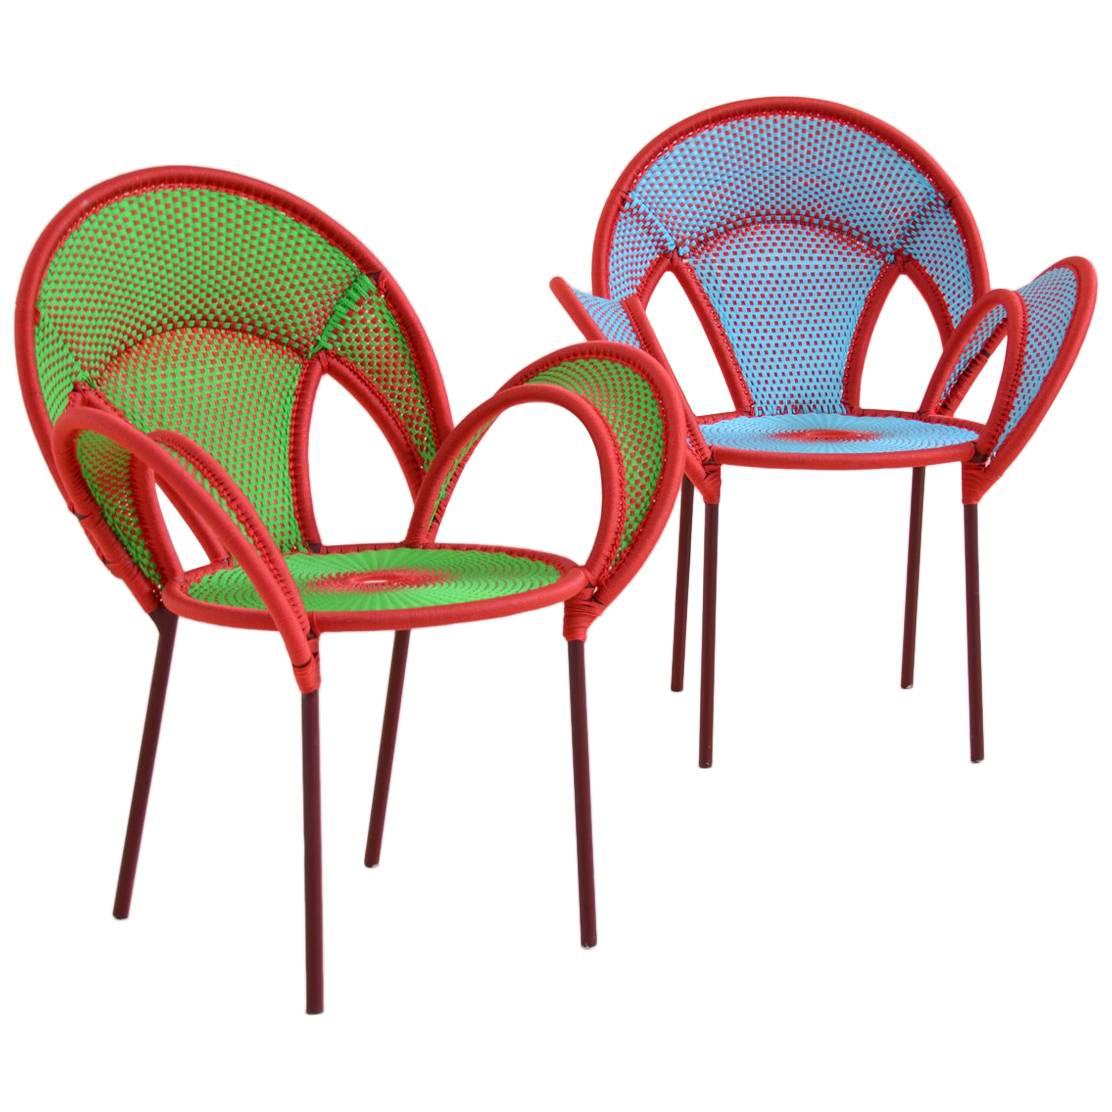 Moroso Banjooli Armchair for Indoor and Outdoor For Sale